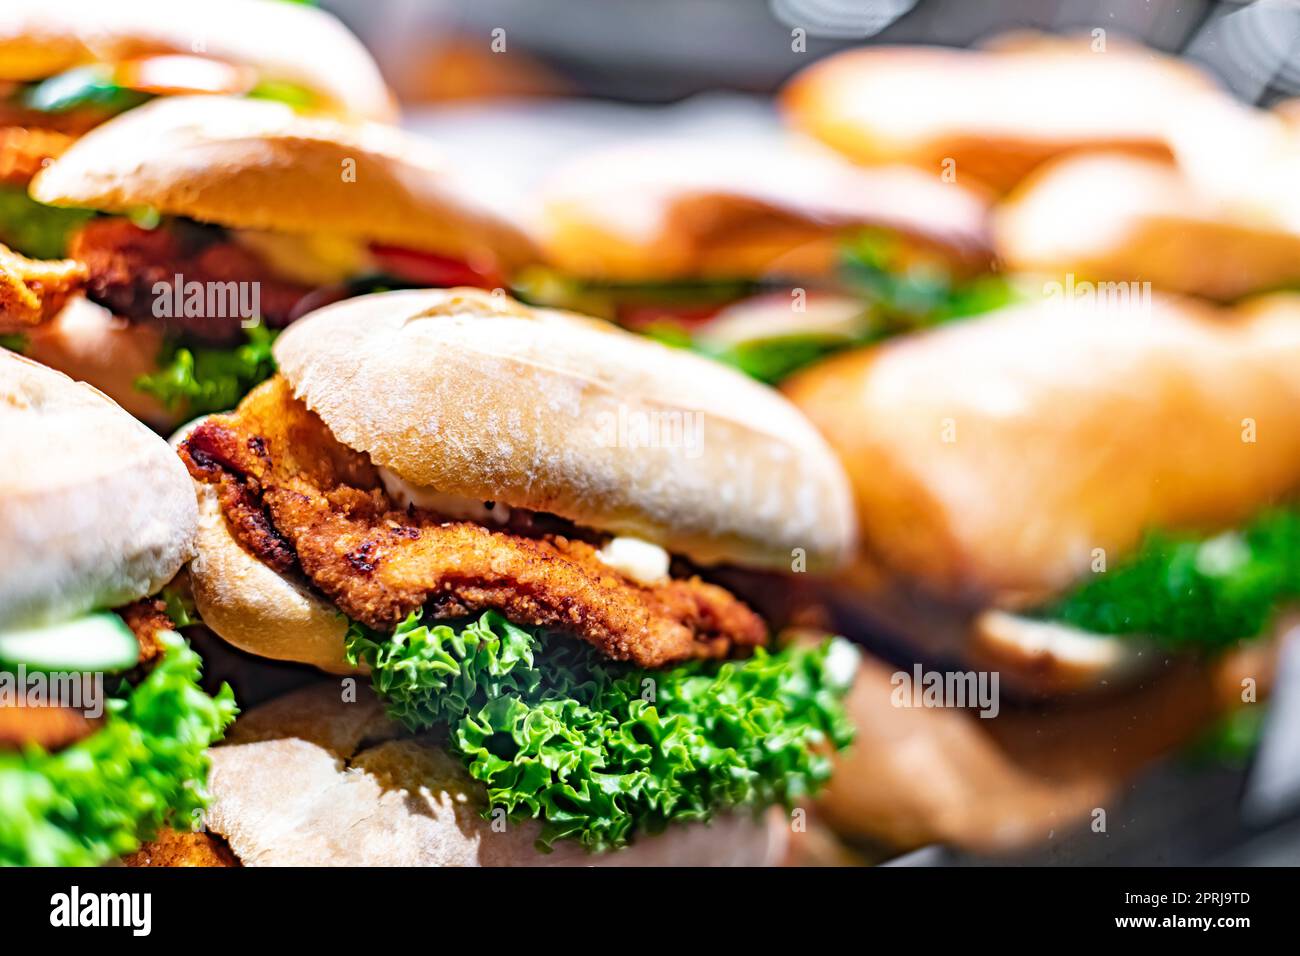 Freshly prepared sandwiches sold in a fast food restaurant Stock Photo